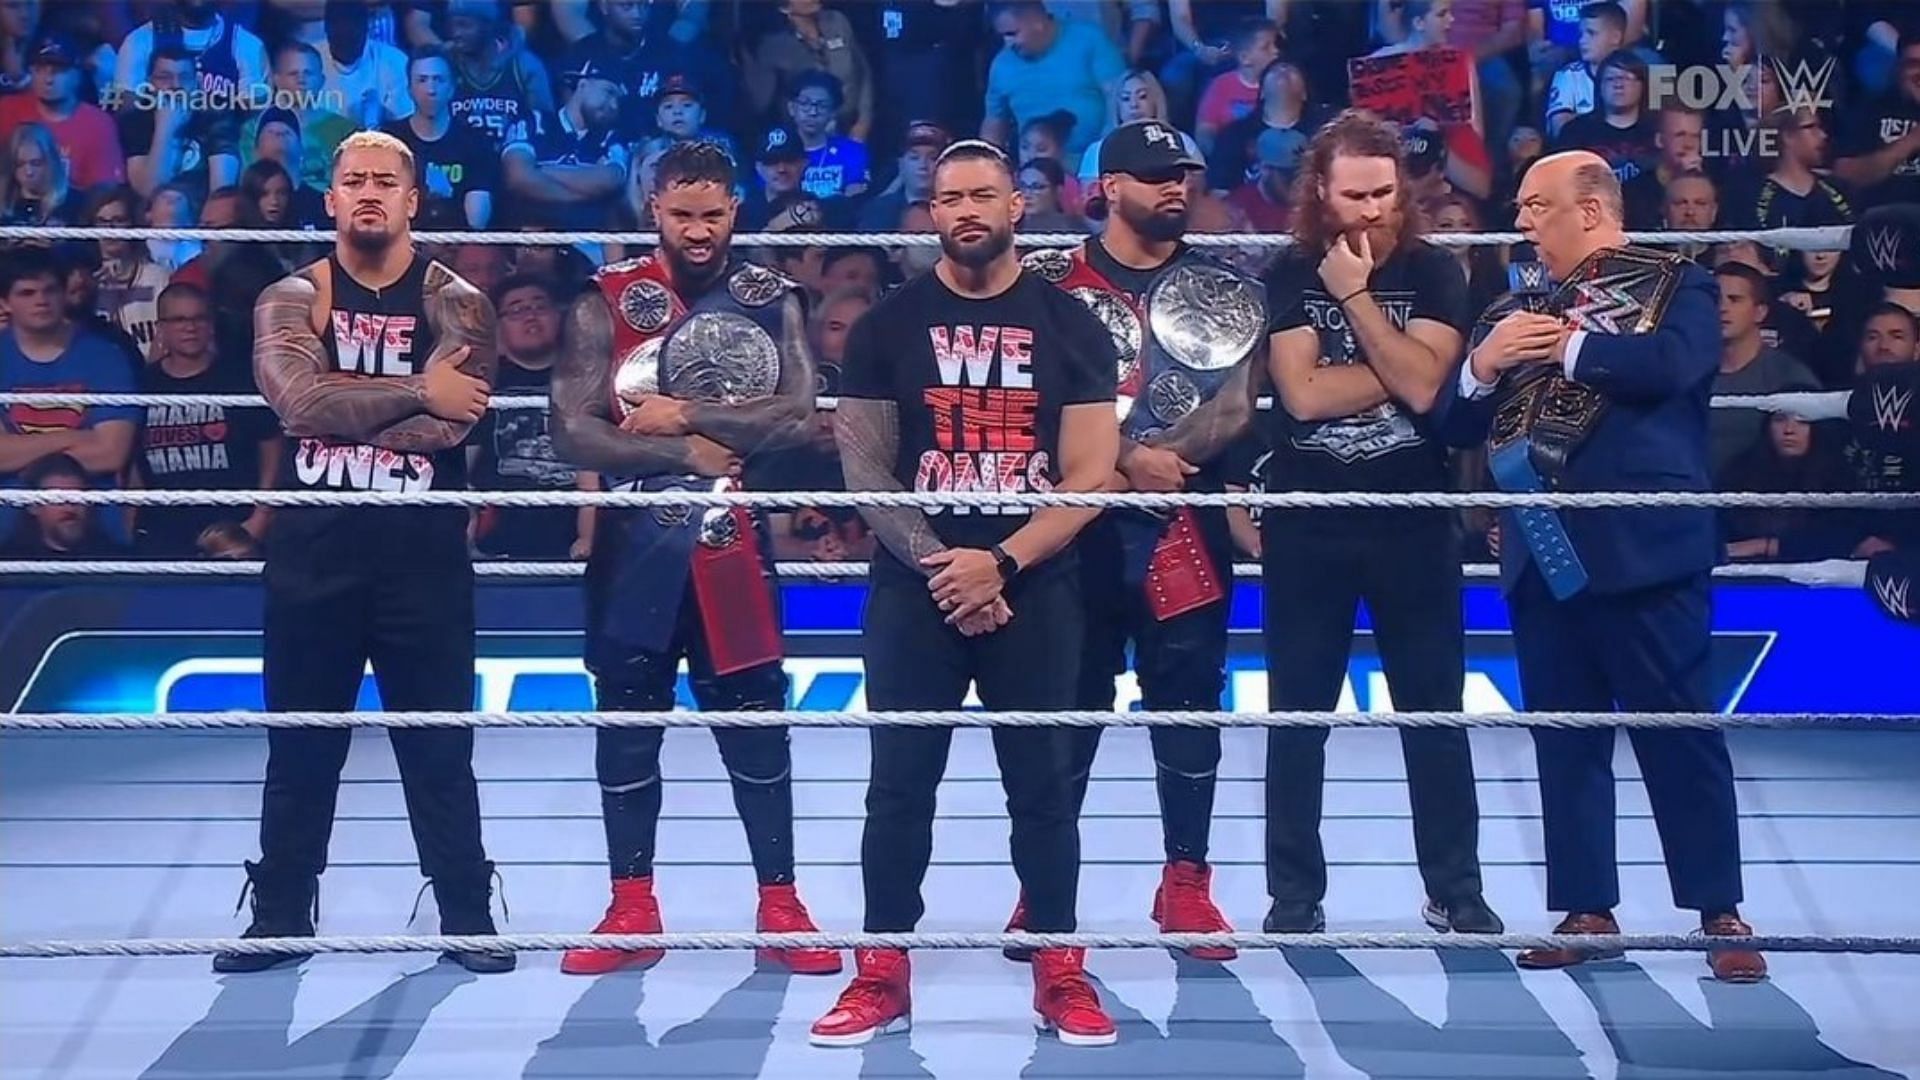 "So much more to tell in a Jey Uso story" - Wrestling world wants Roman Reigns' fellow Bloodline stablemate to dethrone him after huge SmackDown segment